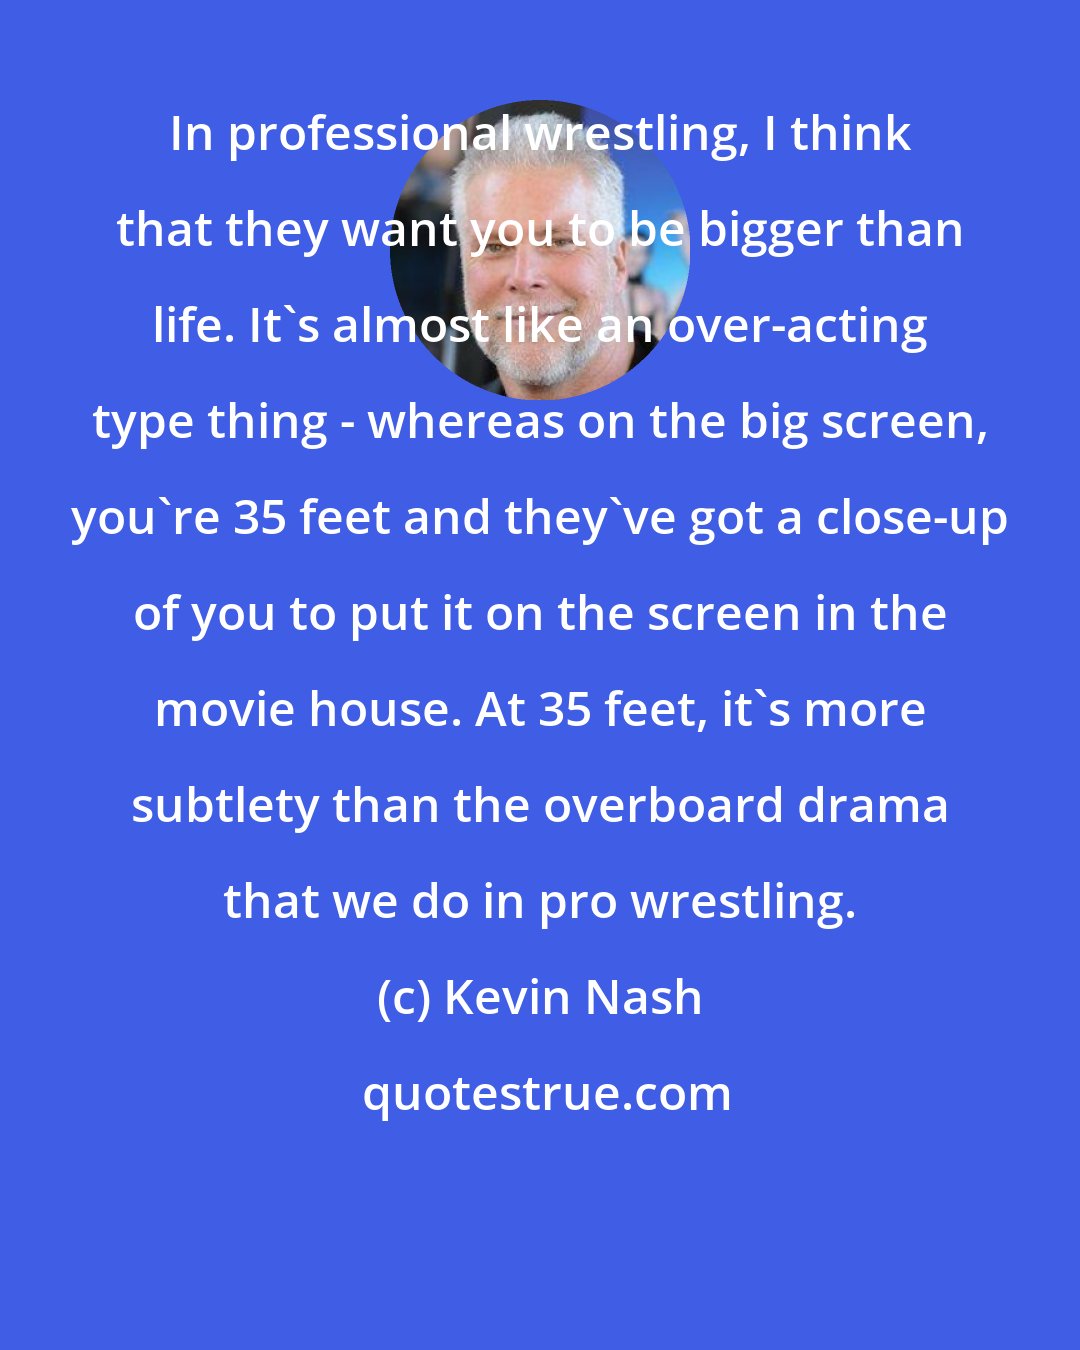 Kevin Nash: In professional wrestling, I think that they want you to be bigger than life. It's almost like an over-acting type thing - whereas on the big screen, you're 35 feet and they've got a close-up of you to put it on the screen in the movie house. At 35 feet, it's more subtlety than the overboard drama that we do in pro wrestling.